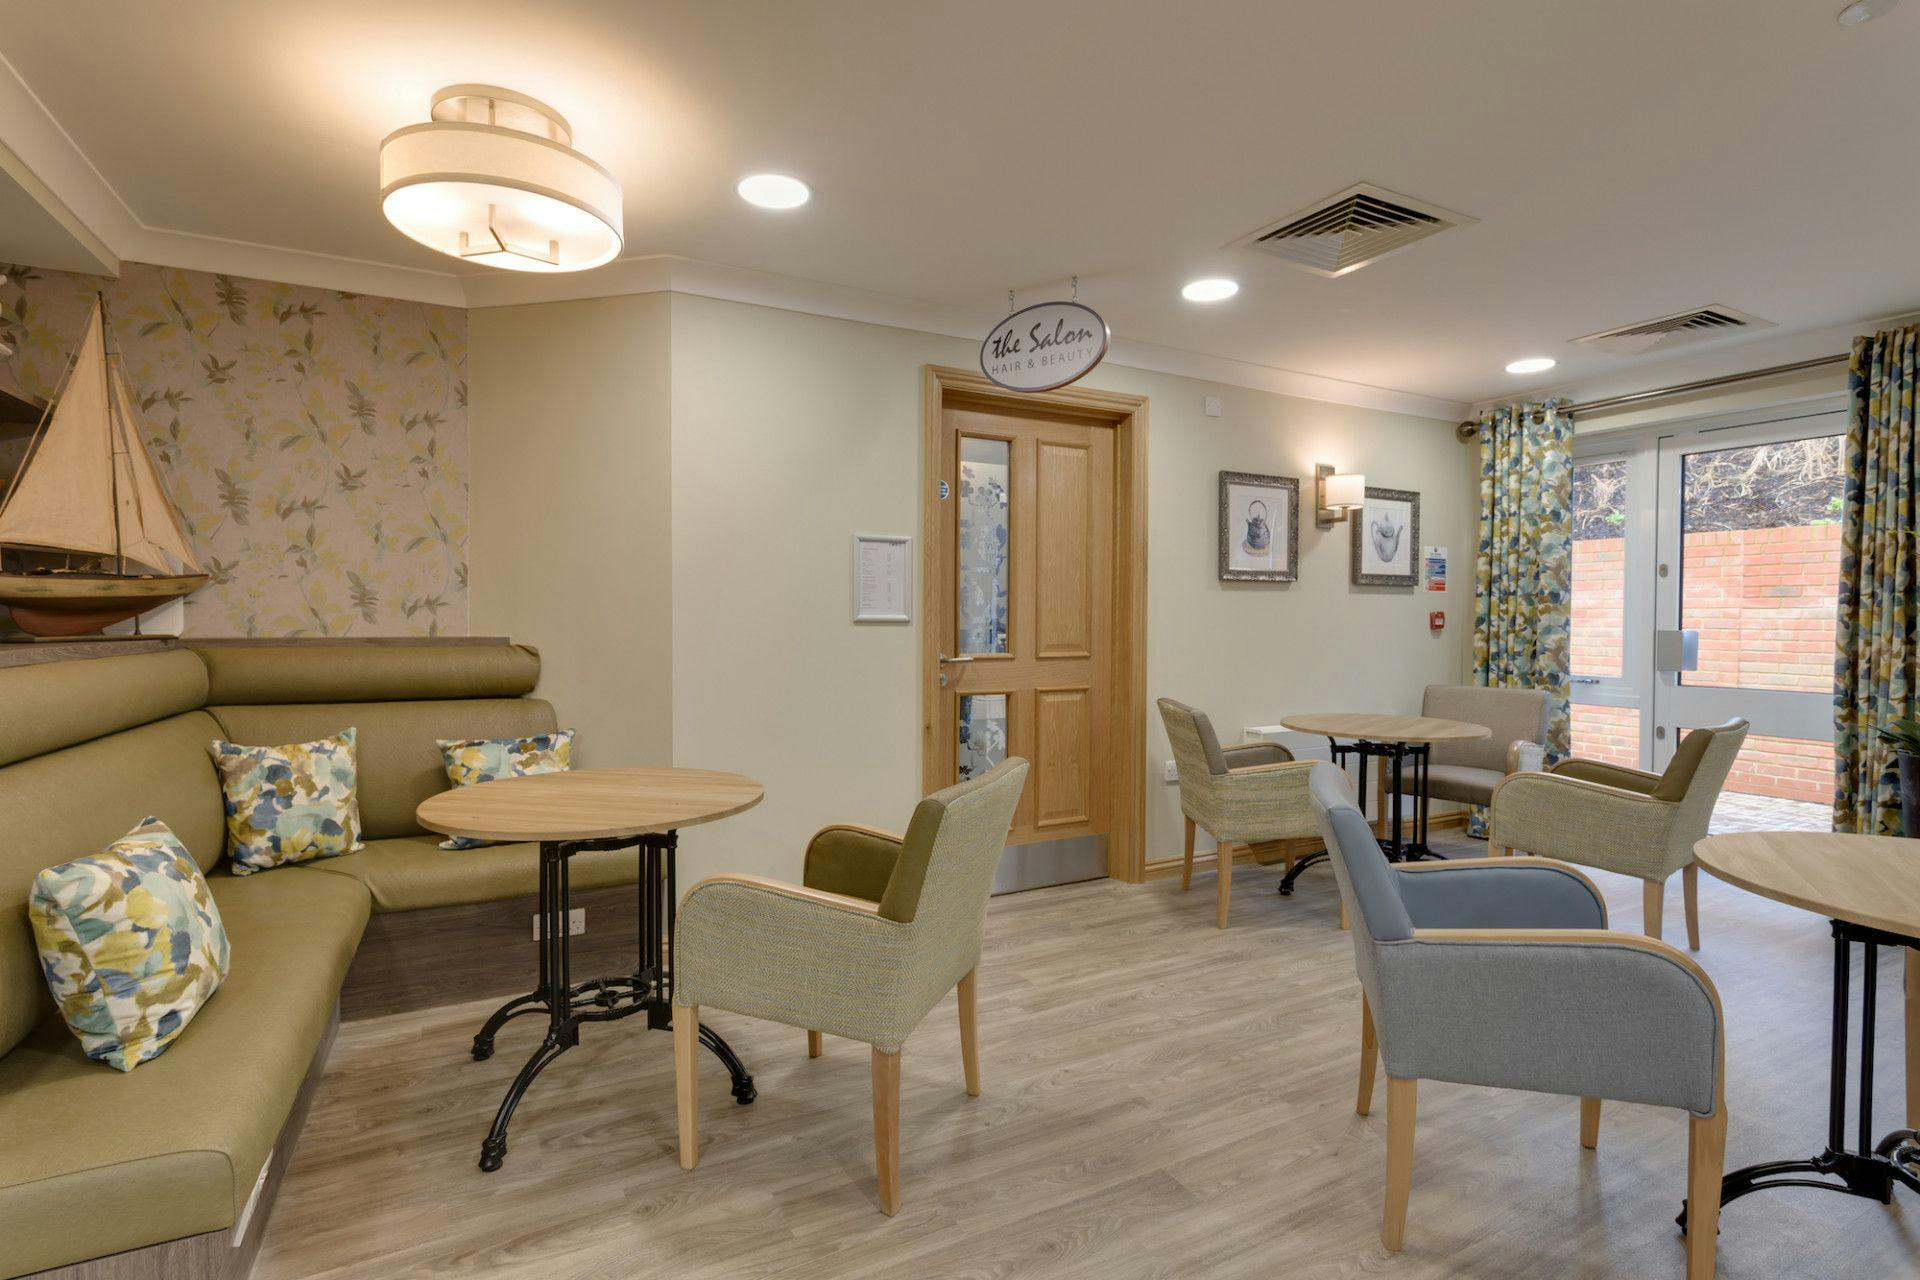 Care UK - Harrier Lodge care home 10